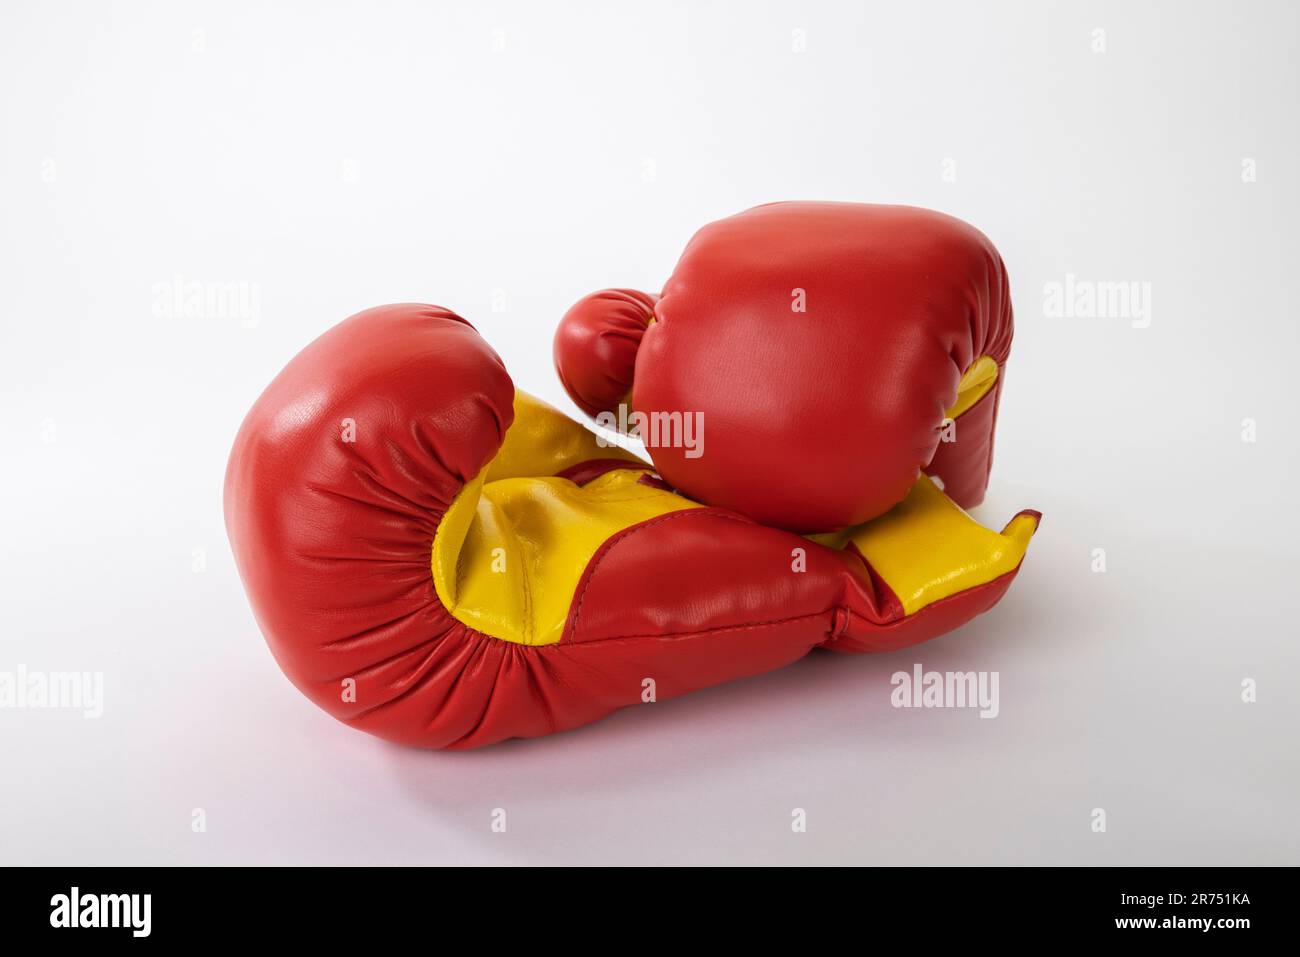 Pair of red and yellow boxing gloves, white background, Stock Photo